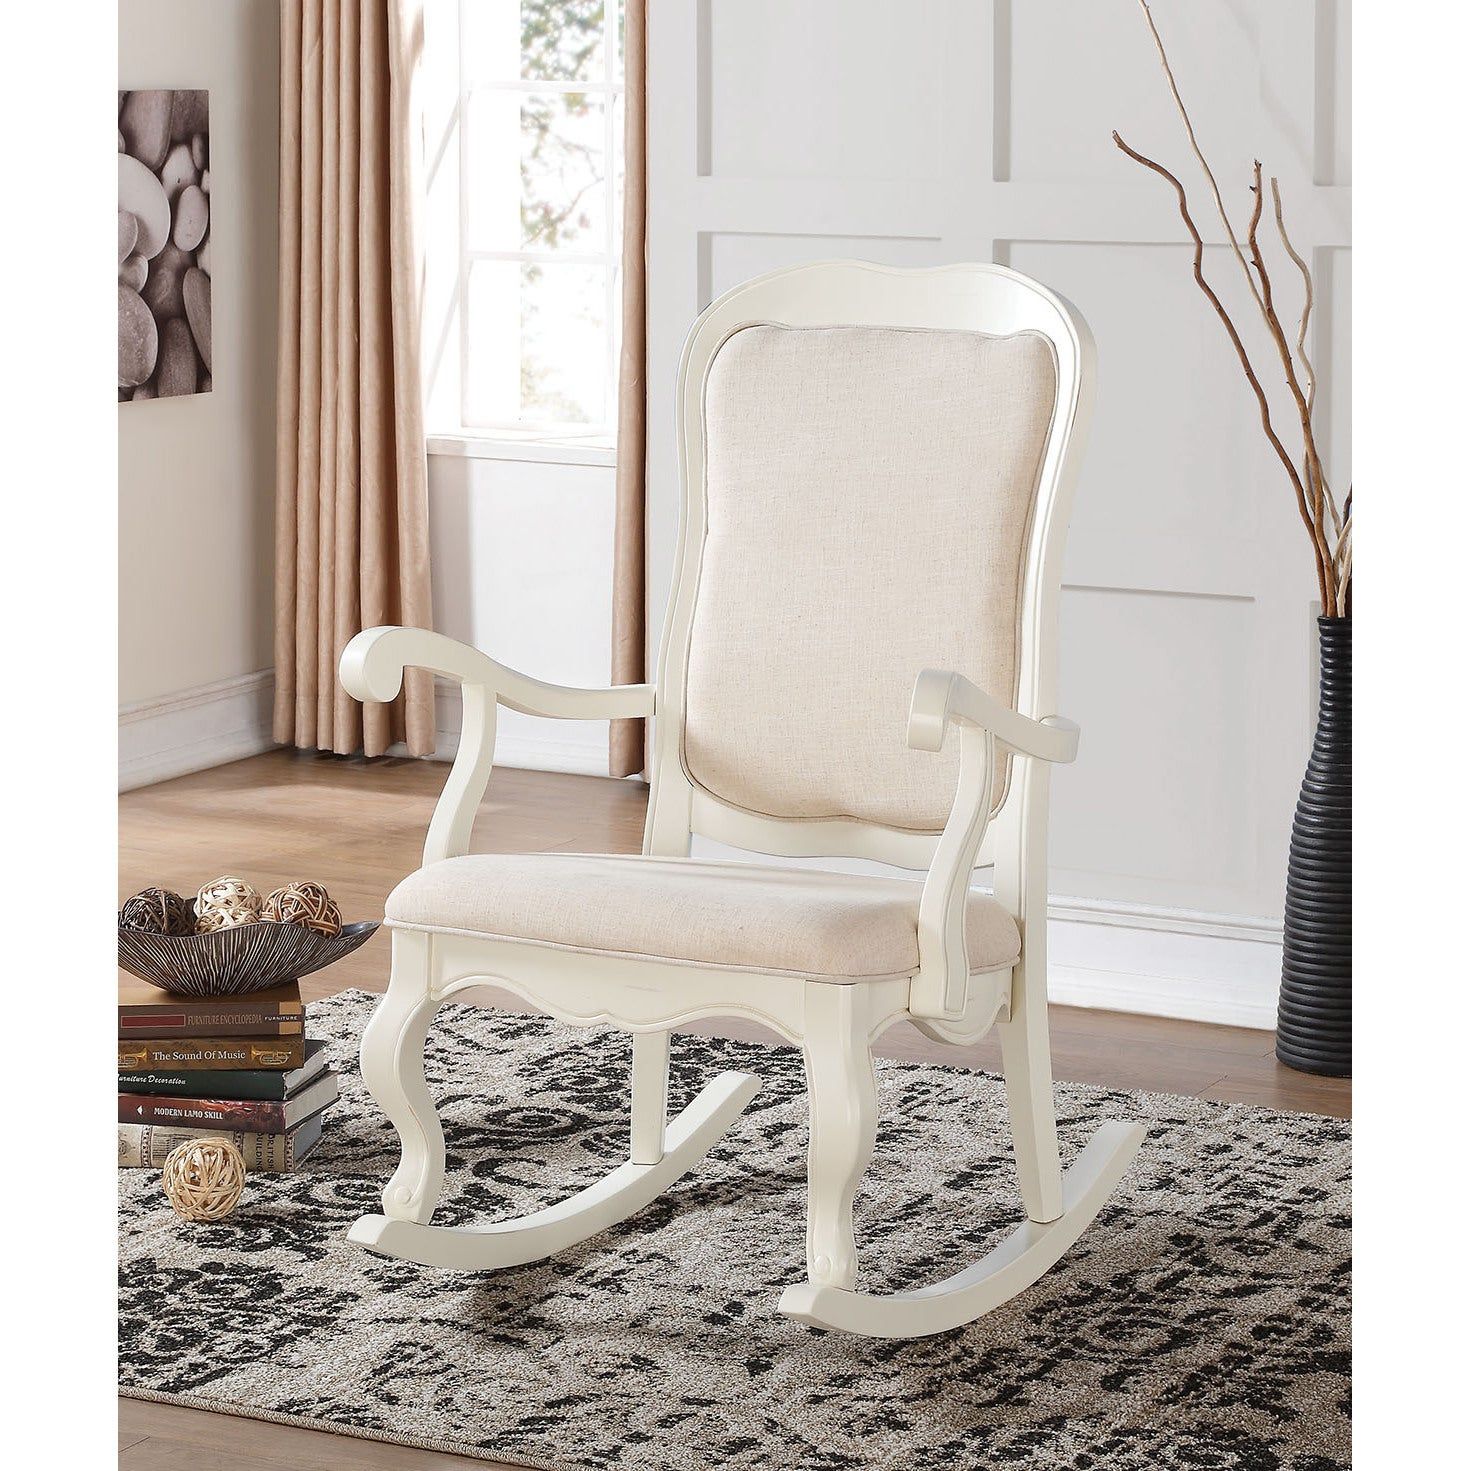 20 Best Collection of Antique White Wooden Rocking Chairs